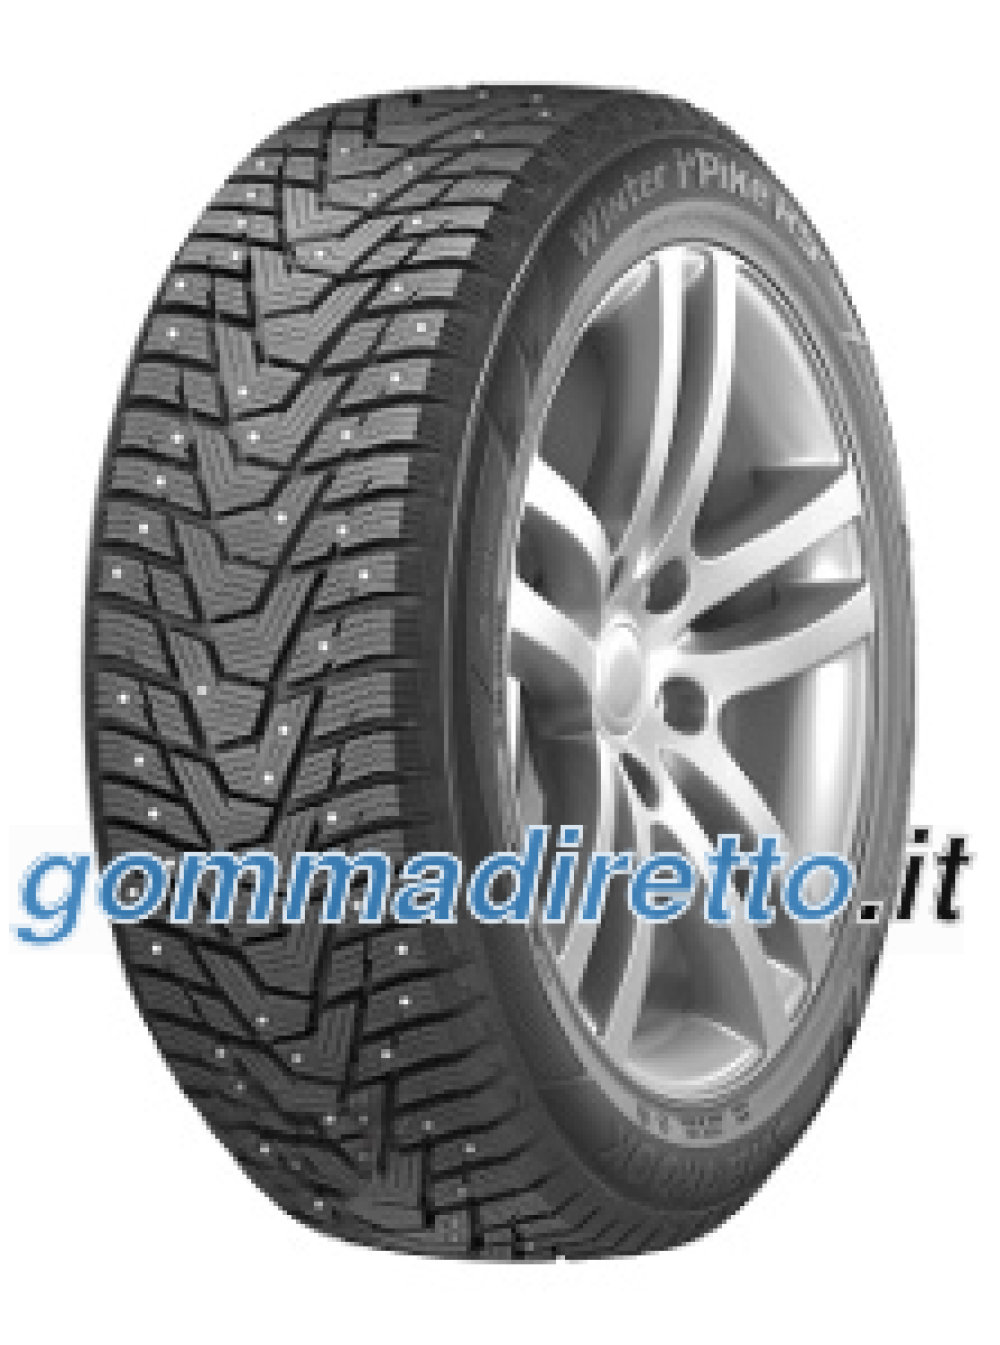 Image of Hankook Winter I*Pike RS2 W429 ( 205/60 R16 96T XL, pneumatico chiodato SBL )